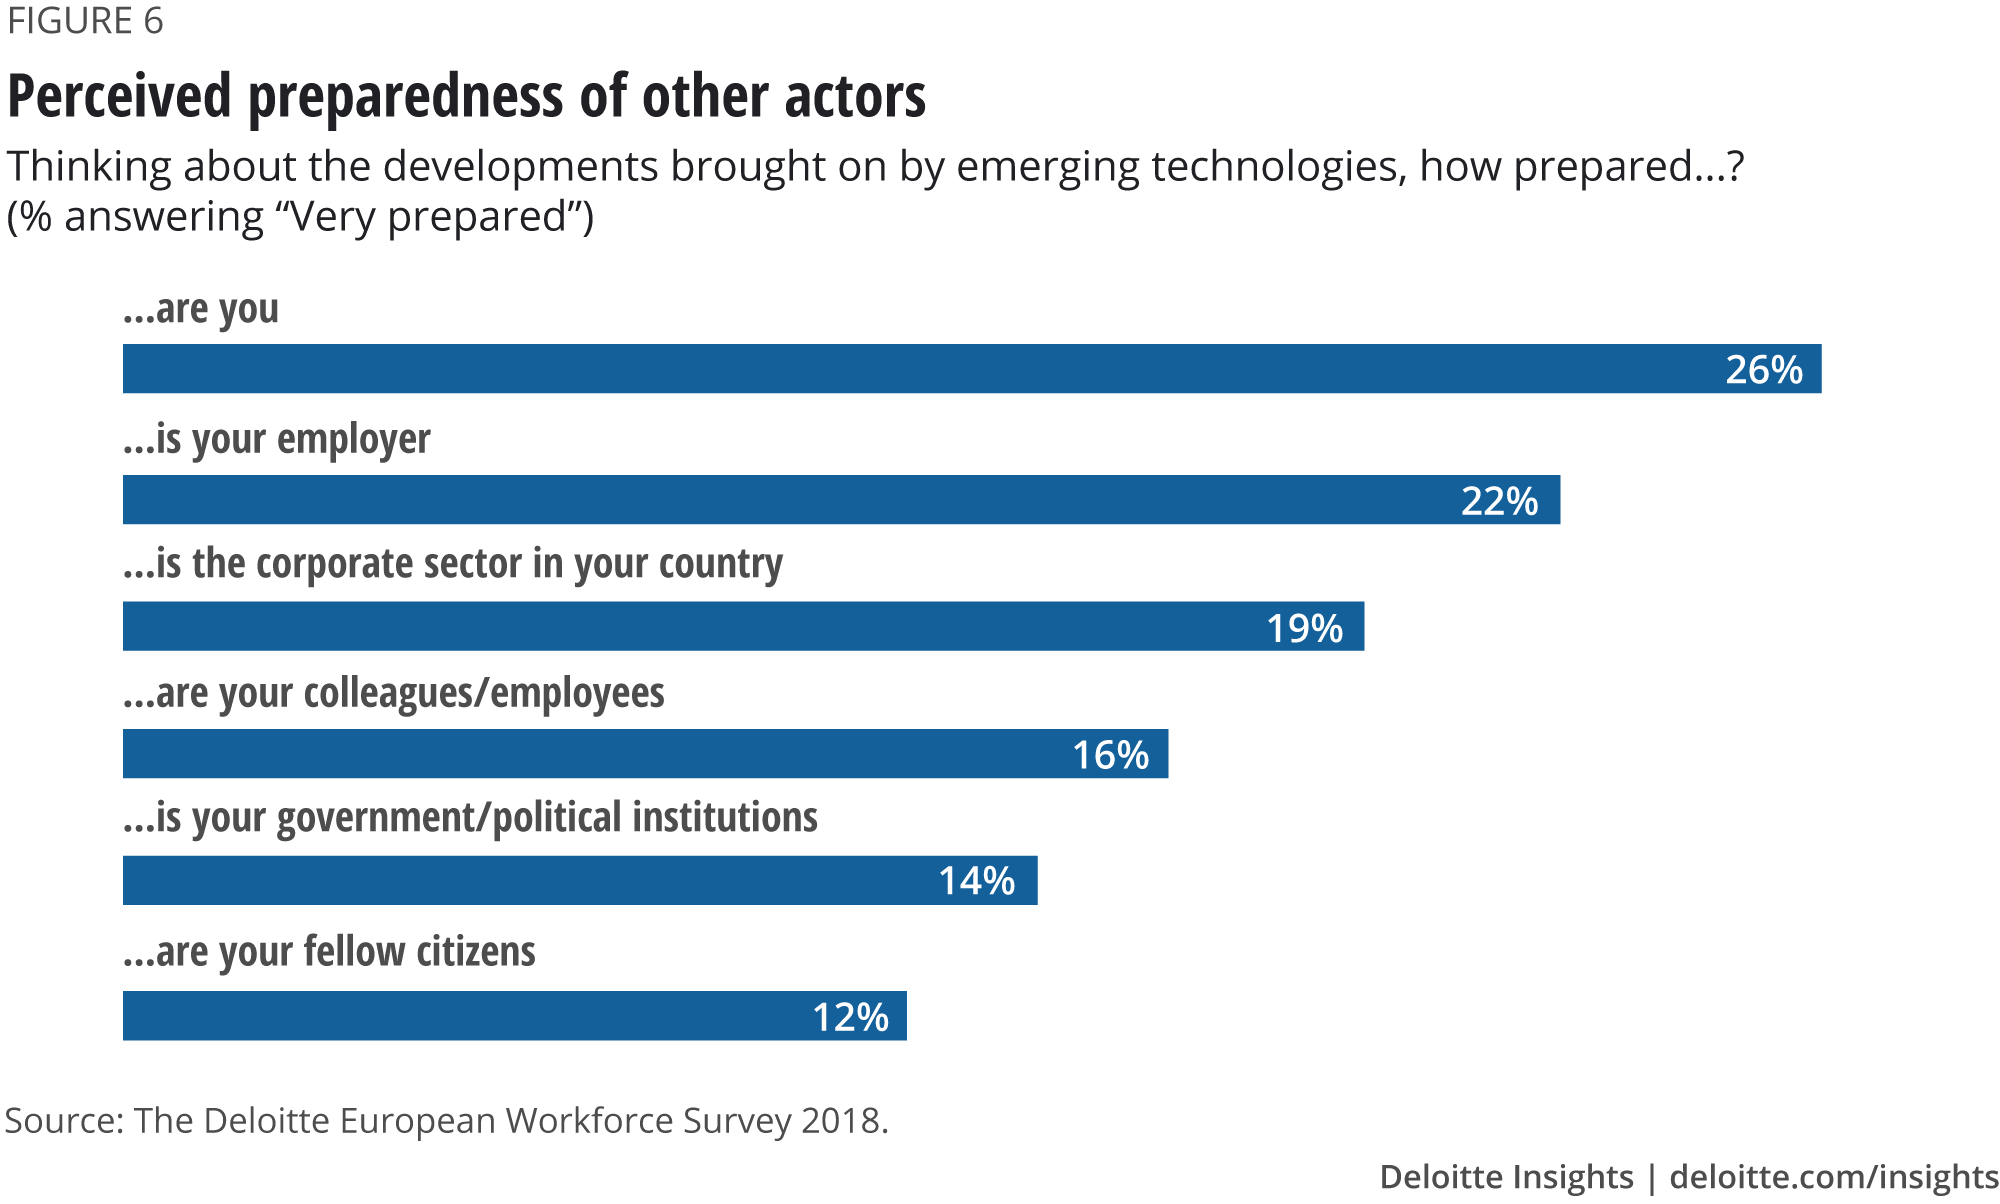 Perceived preparedness of other actors